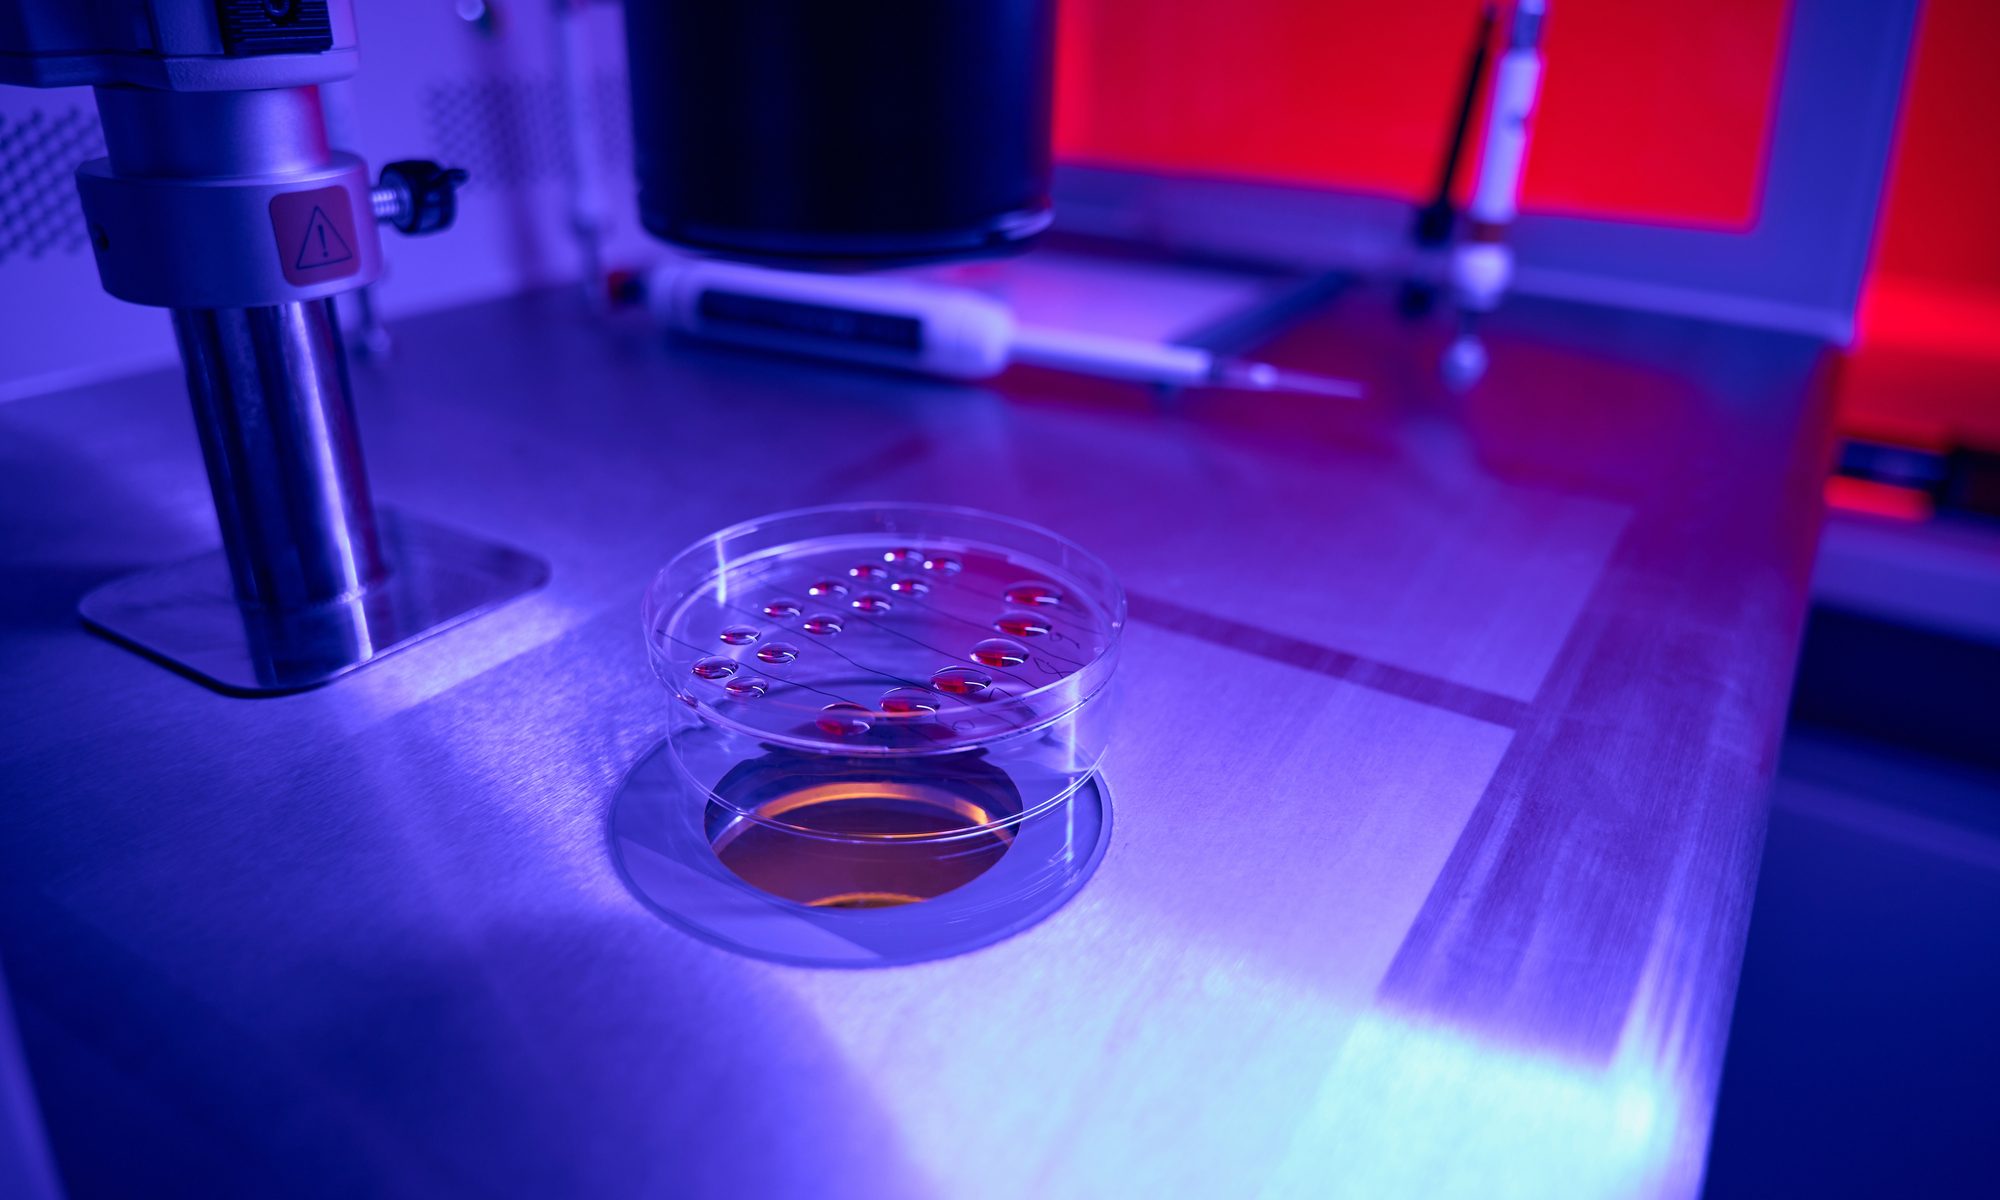 photograph of in vitro cell culture dish in lab